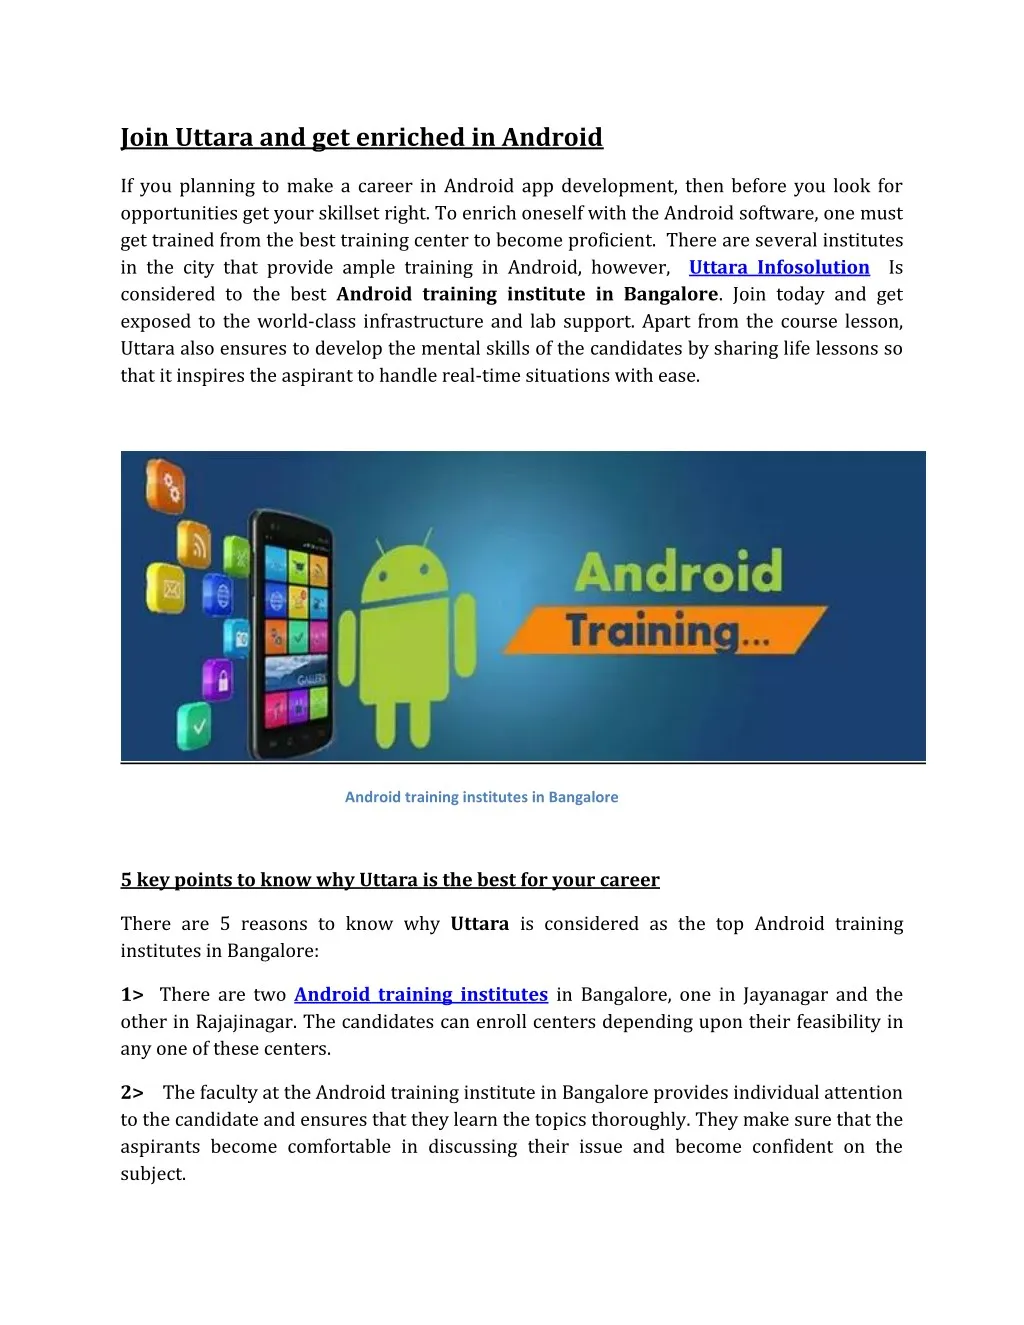 join uttara and get enriched in android